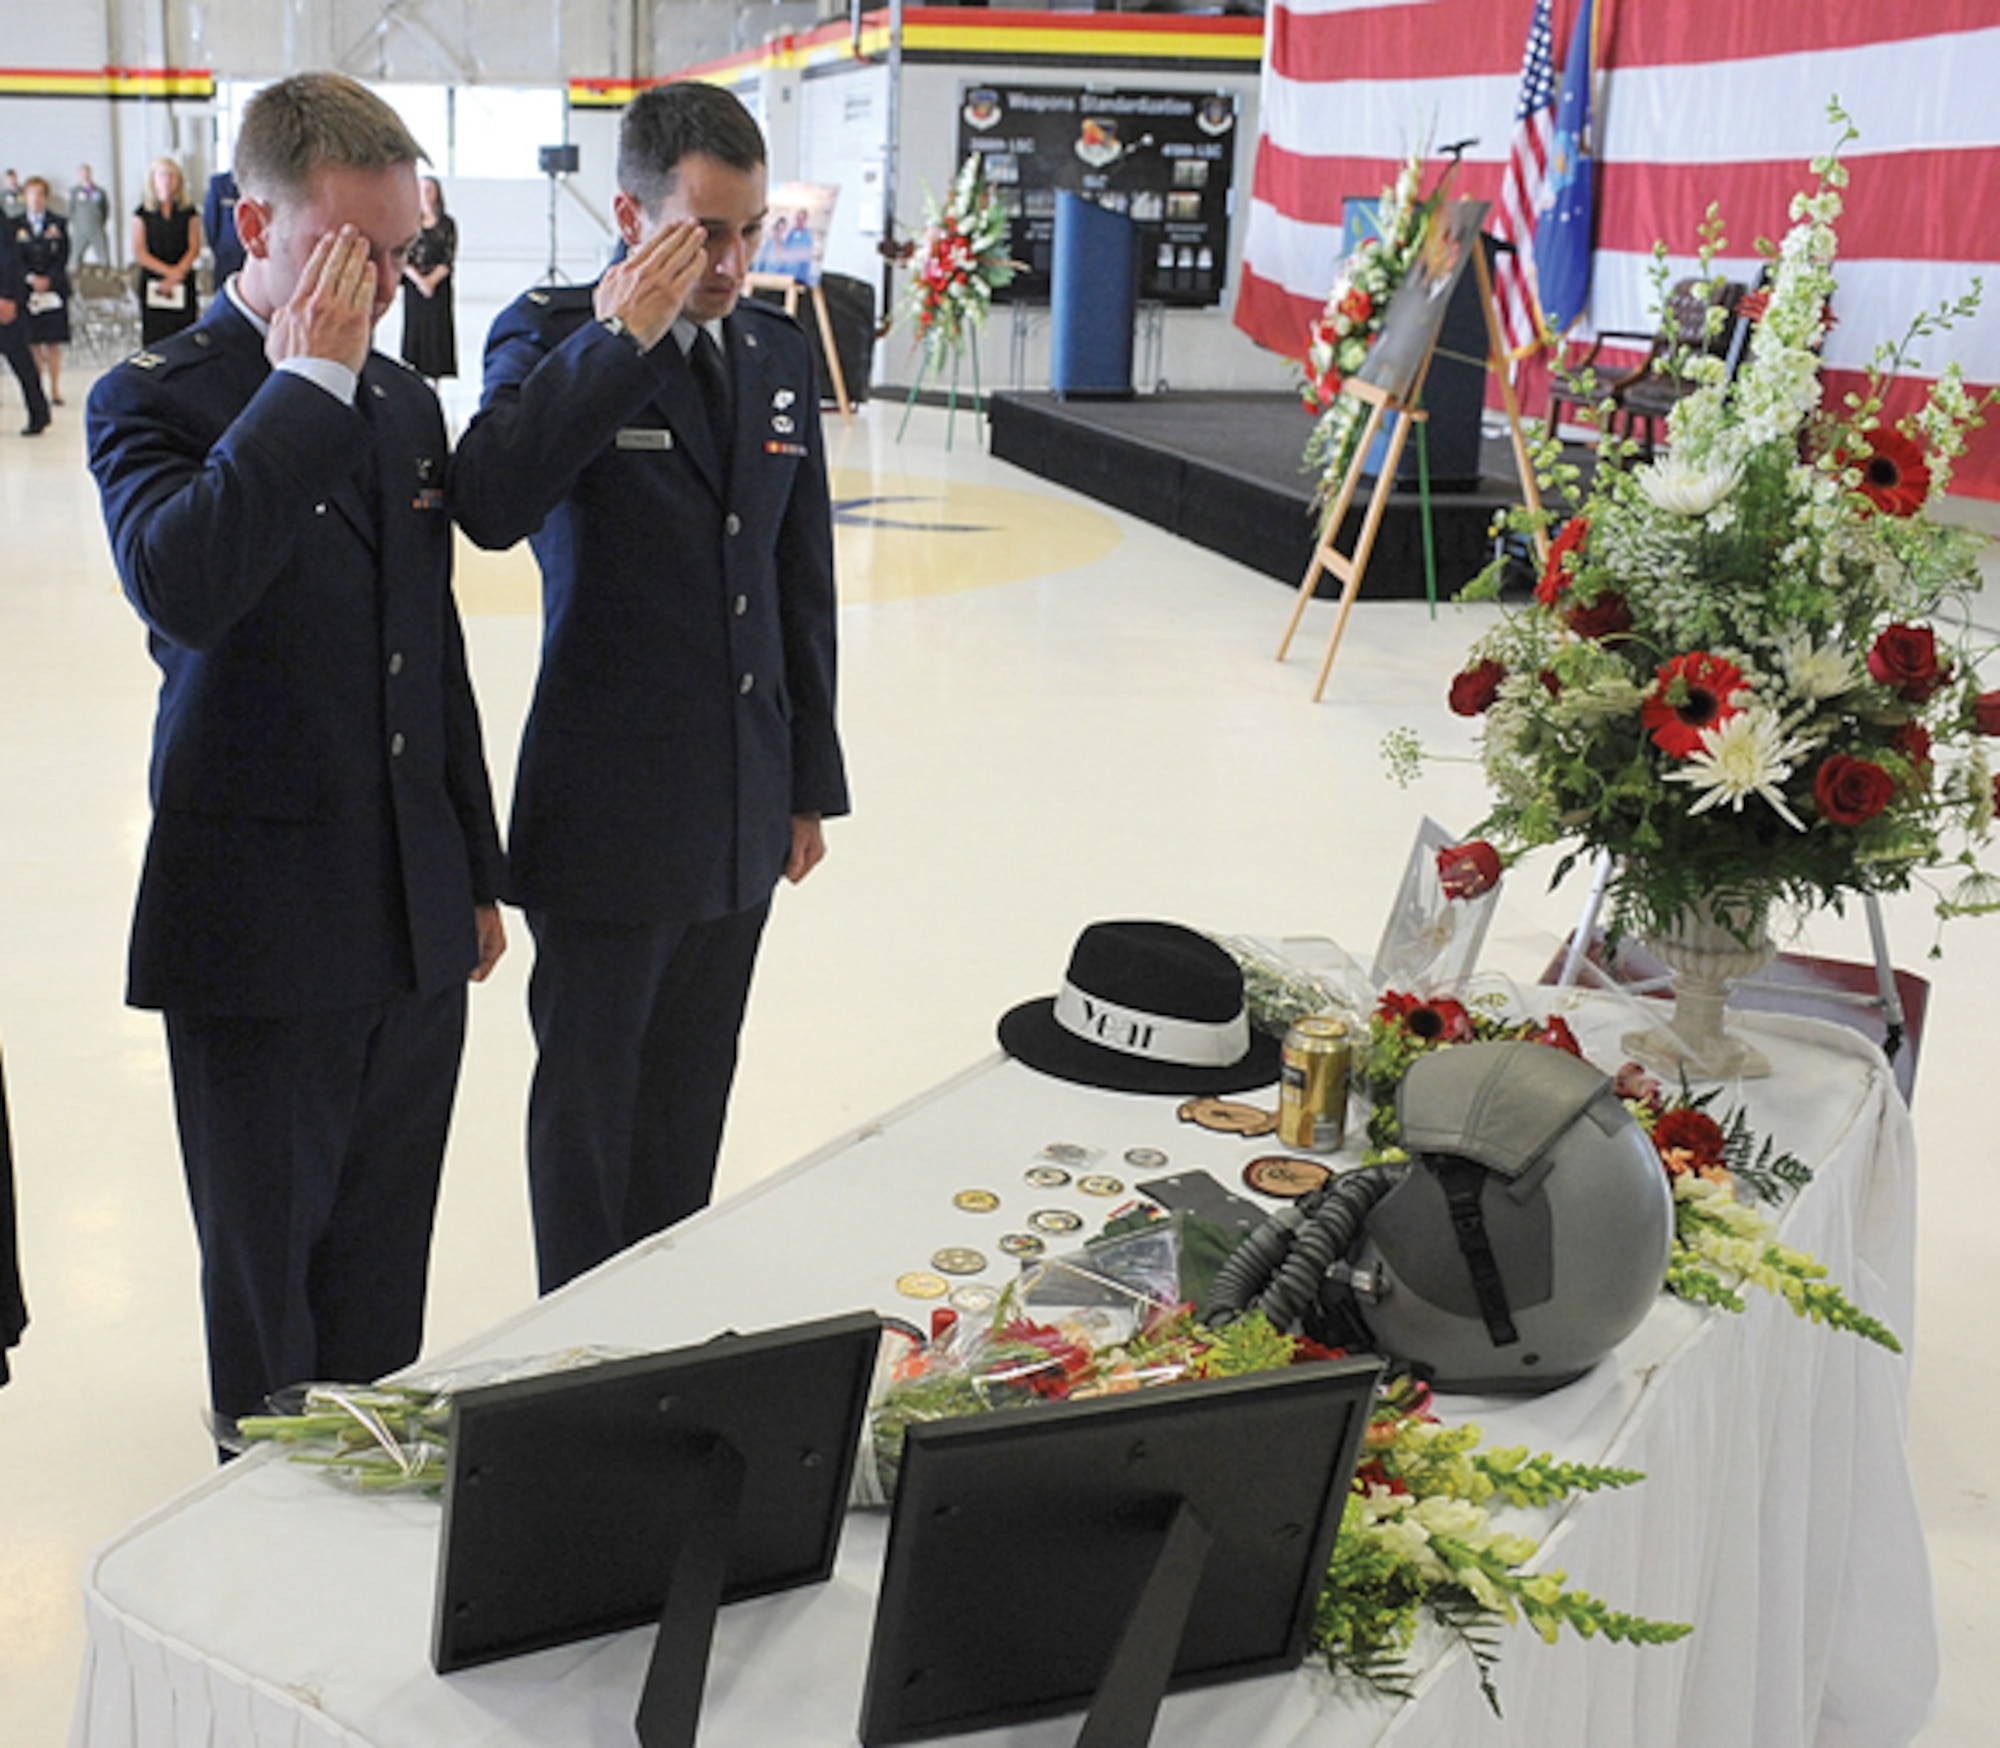 Capt. Benjamin Meier, left, and 1st Lt. Mike Pacini, both of the 421st Fighter Squadron, salute in remembrance of Capt. George Houghton, 421st FS, at a memorial service held at Hill AFB in his memory June 26.  (U.S. Air Force photo by Alex R. Lloyd)